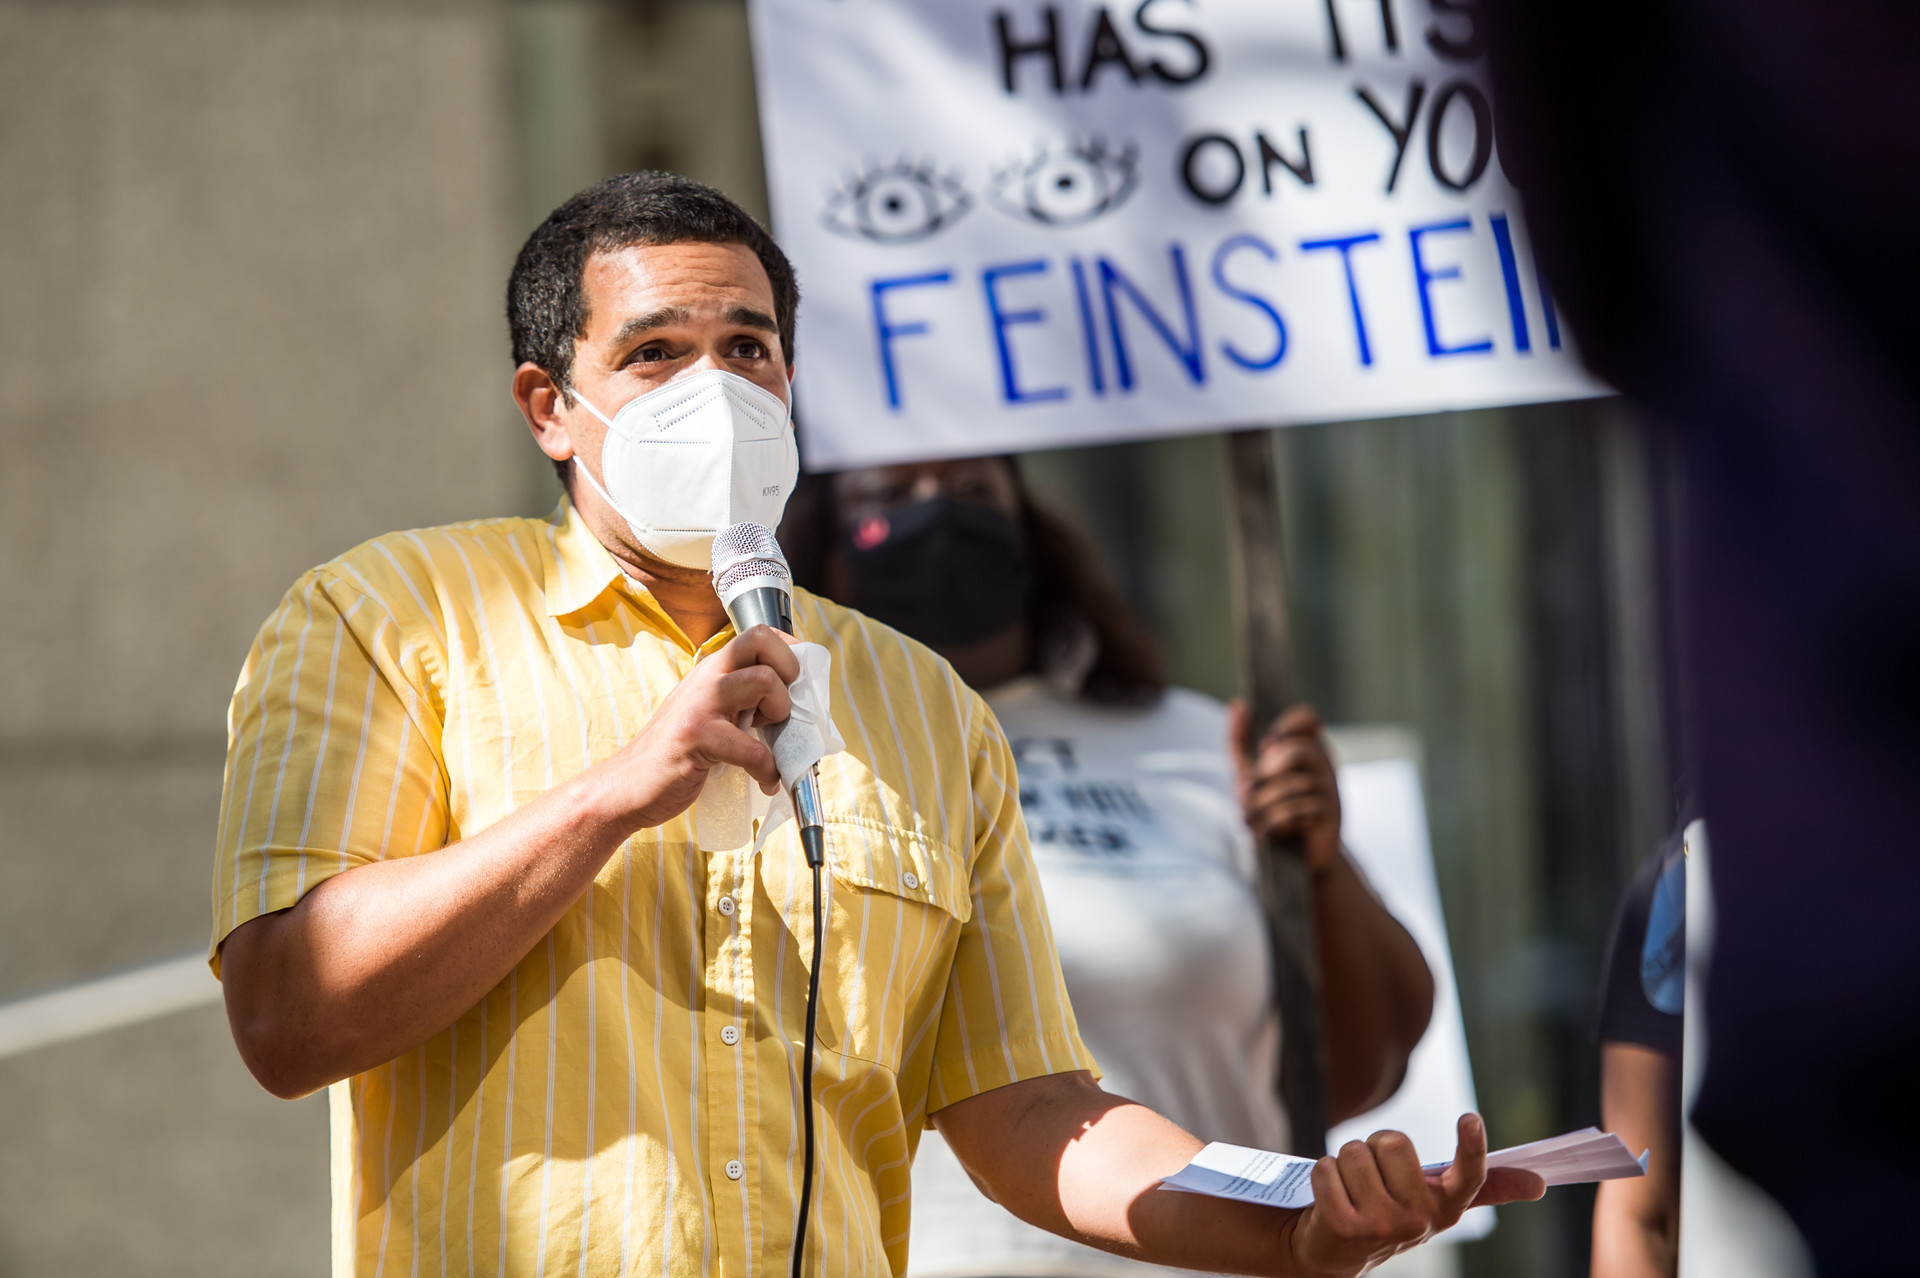 Richmond City Councilmember Melvin Willis speaks during a protest outside Sen. Dianne Feinstein's office in San Francisco on Oct. 12, 2020.